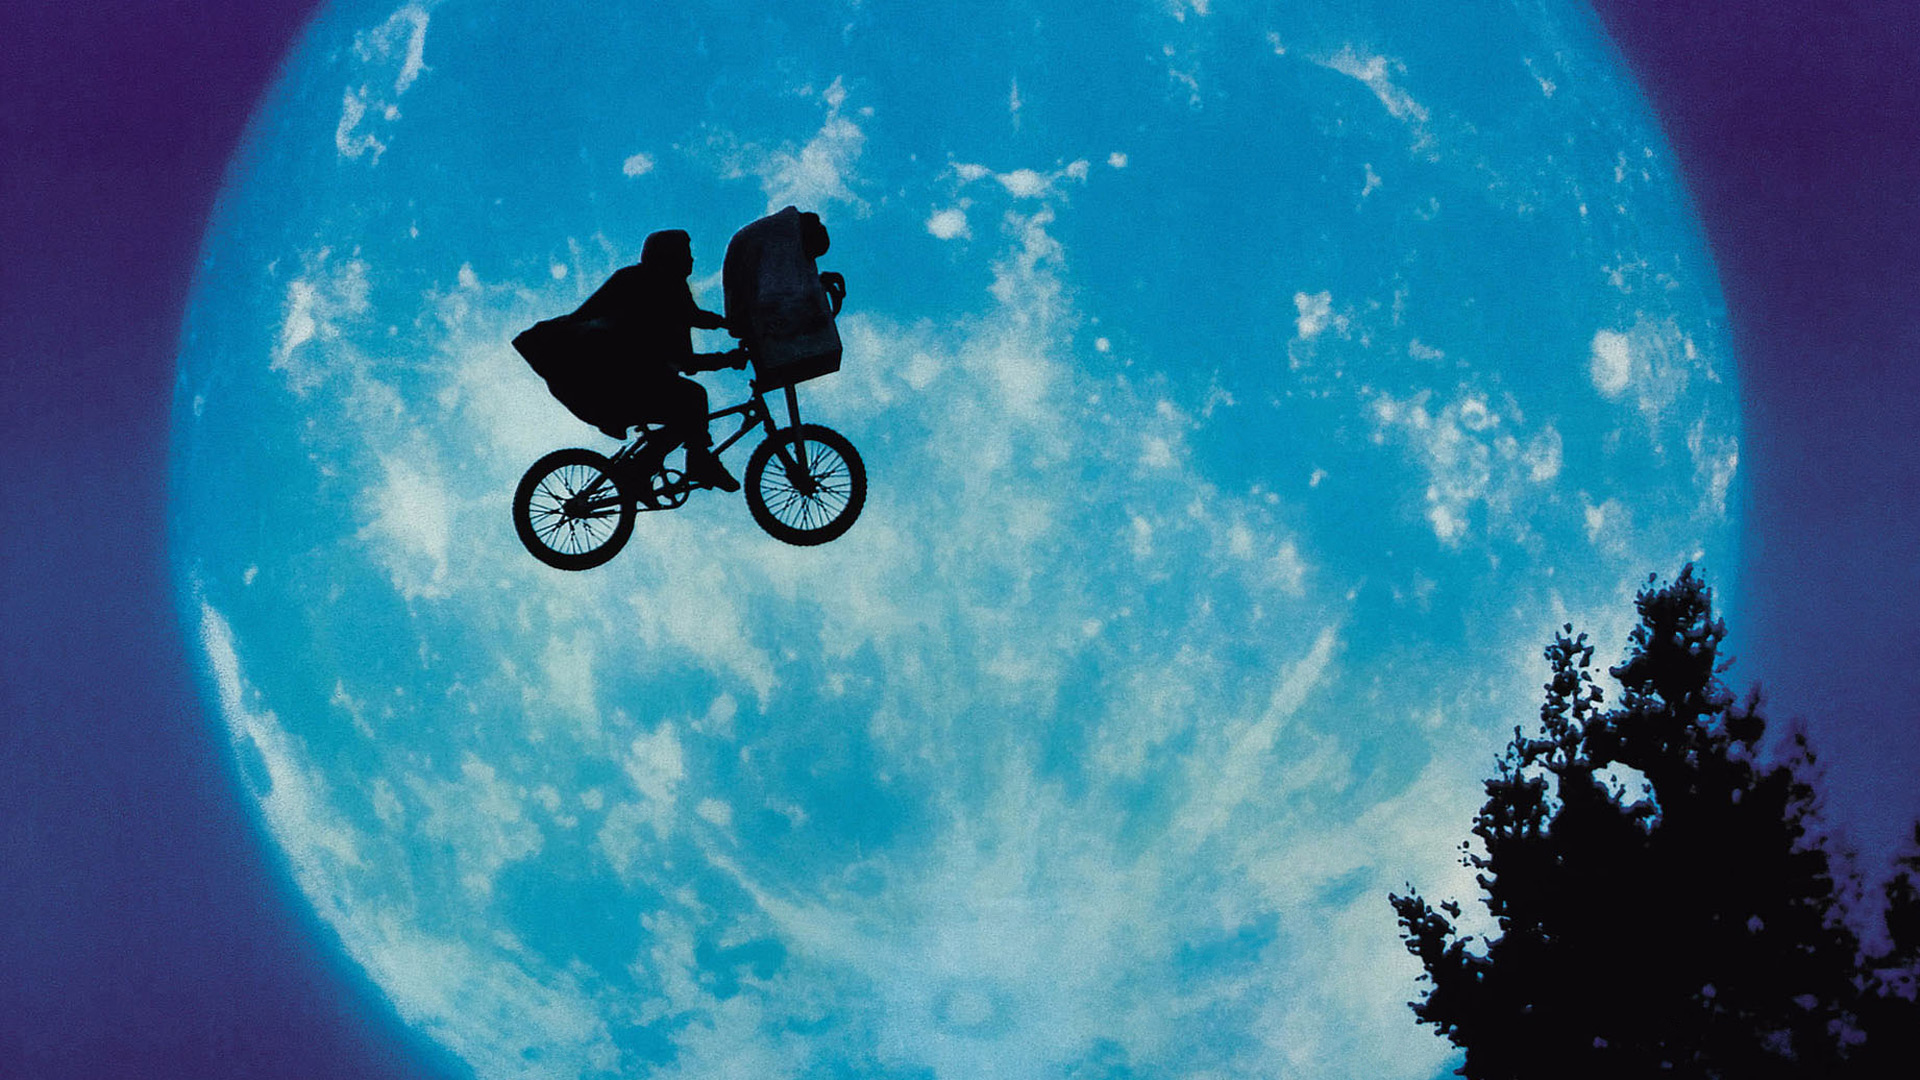 E.T. The Extra-Terrestrial #7